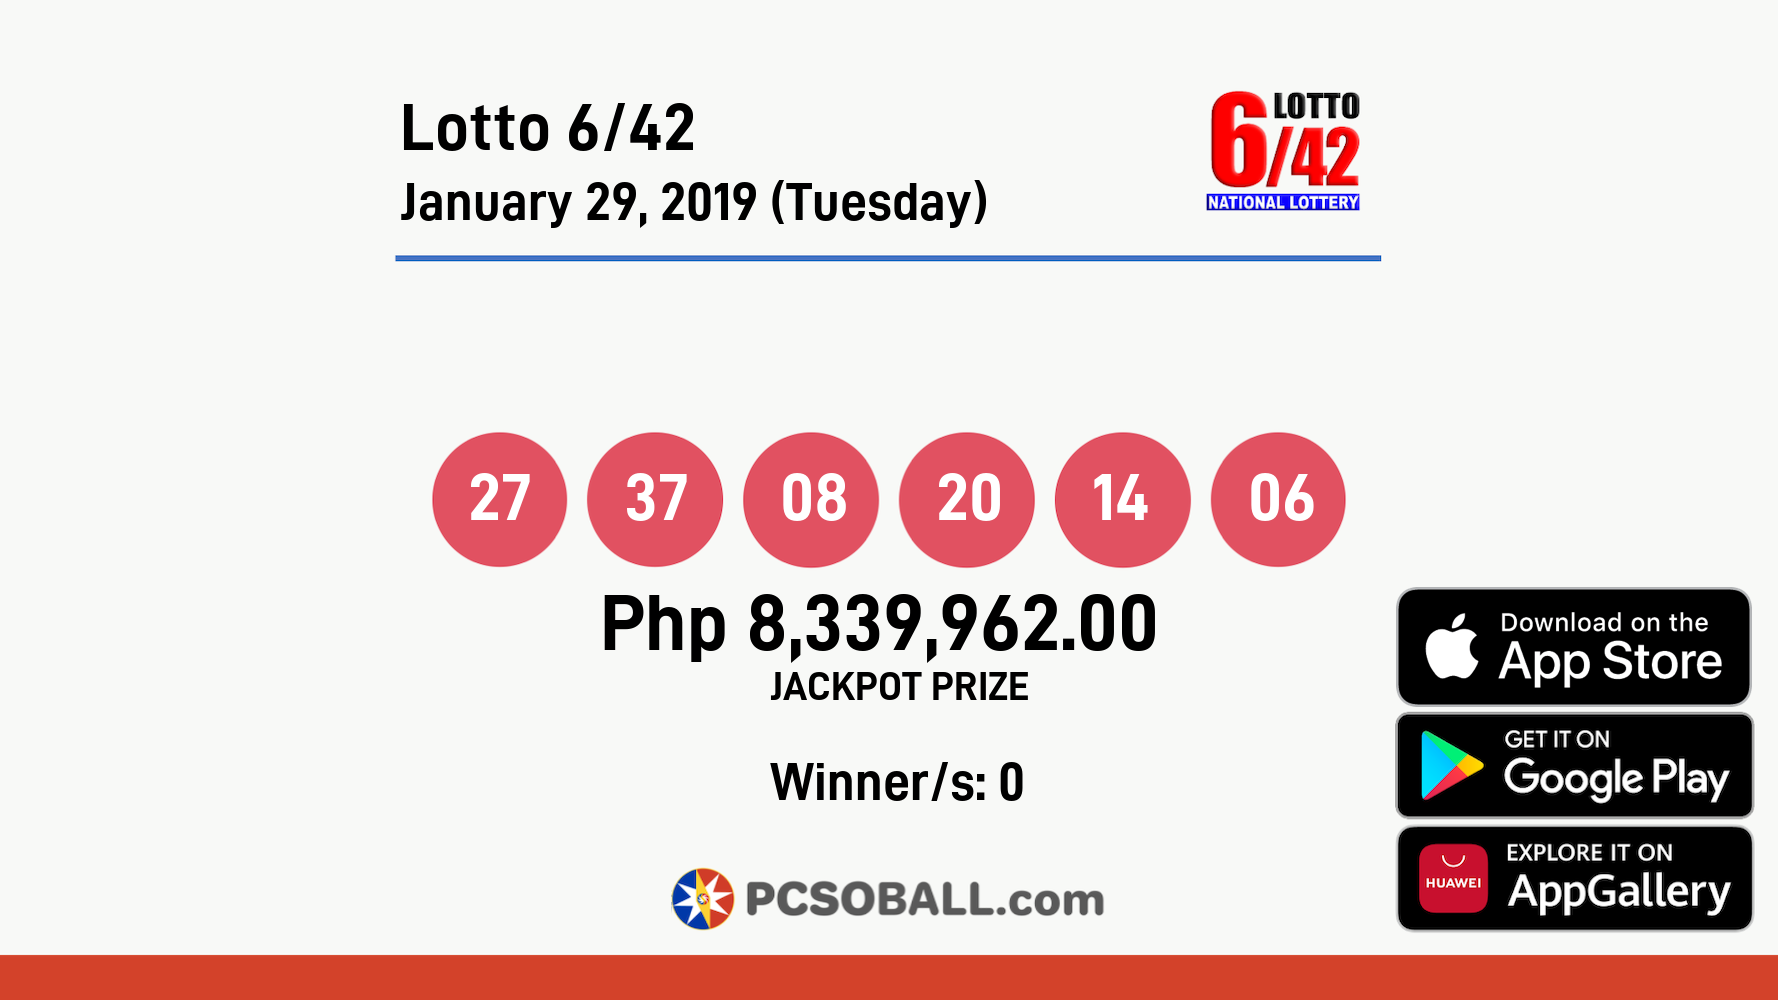 Lotto 6/42 January 29, 2019 (Tuesday) Result